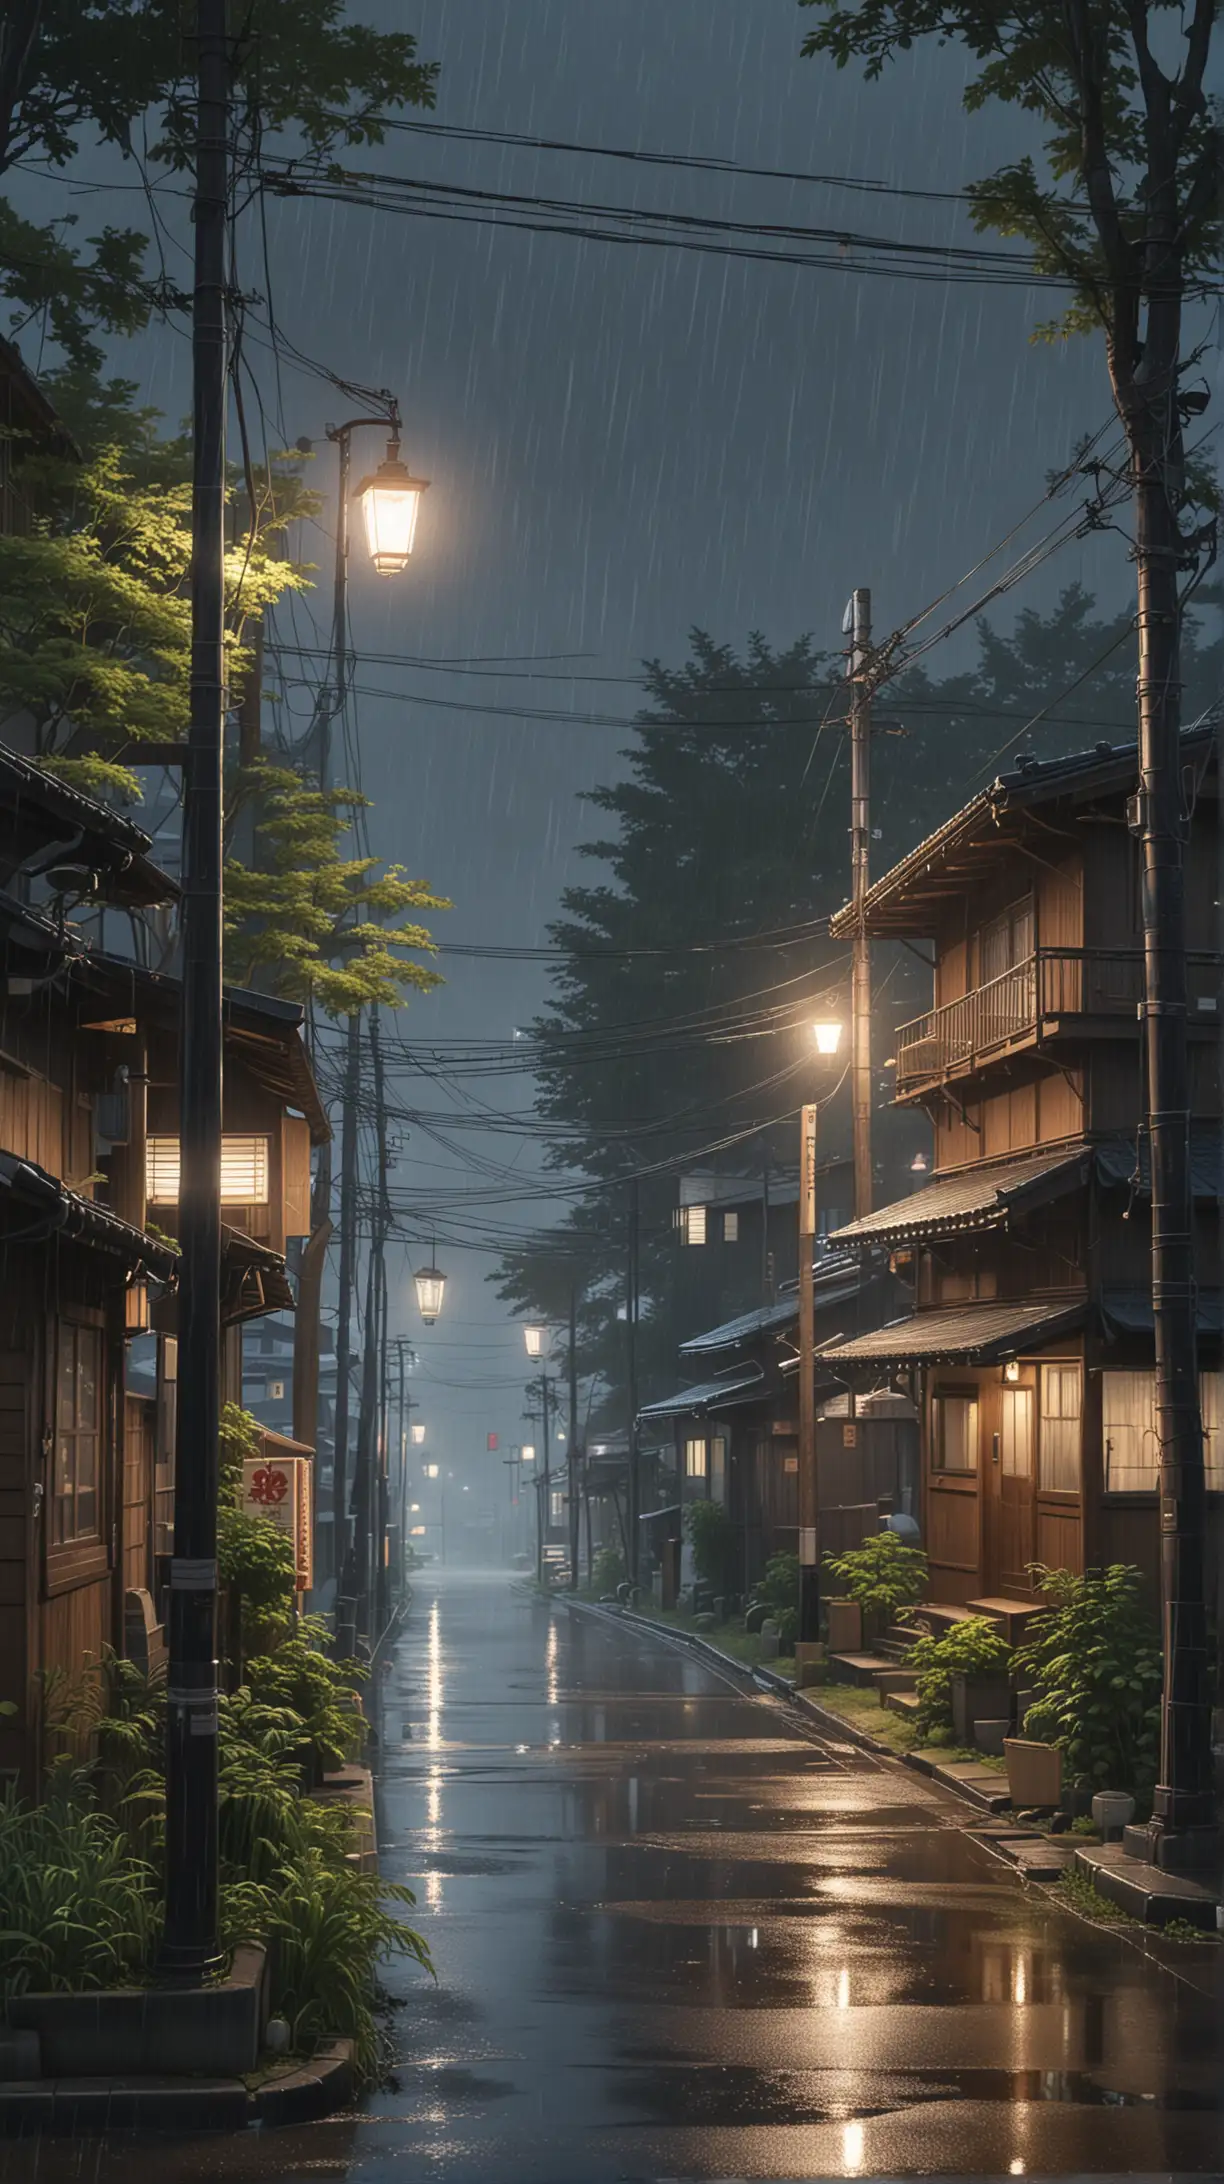 a night in a small village in Japan, raining, typical japan semi modern wood houses and neighbourhoods,  street lamps, wire and pole, trees on the side gang street, illustration, anime, ghibli studio inspiration, 3d render, acrylic palette colors, ultra detailed, 